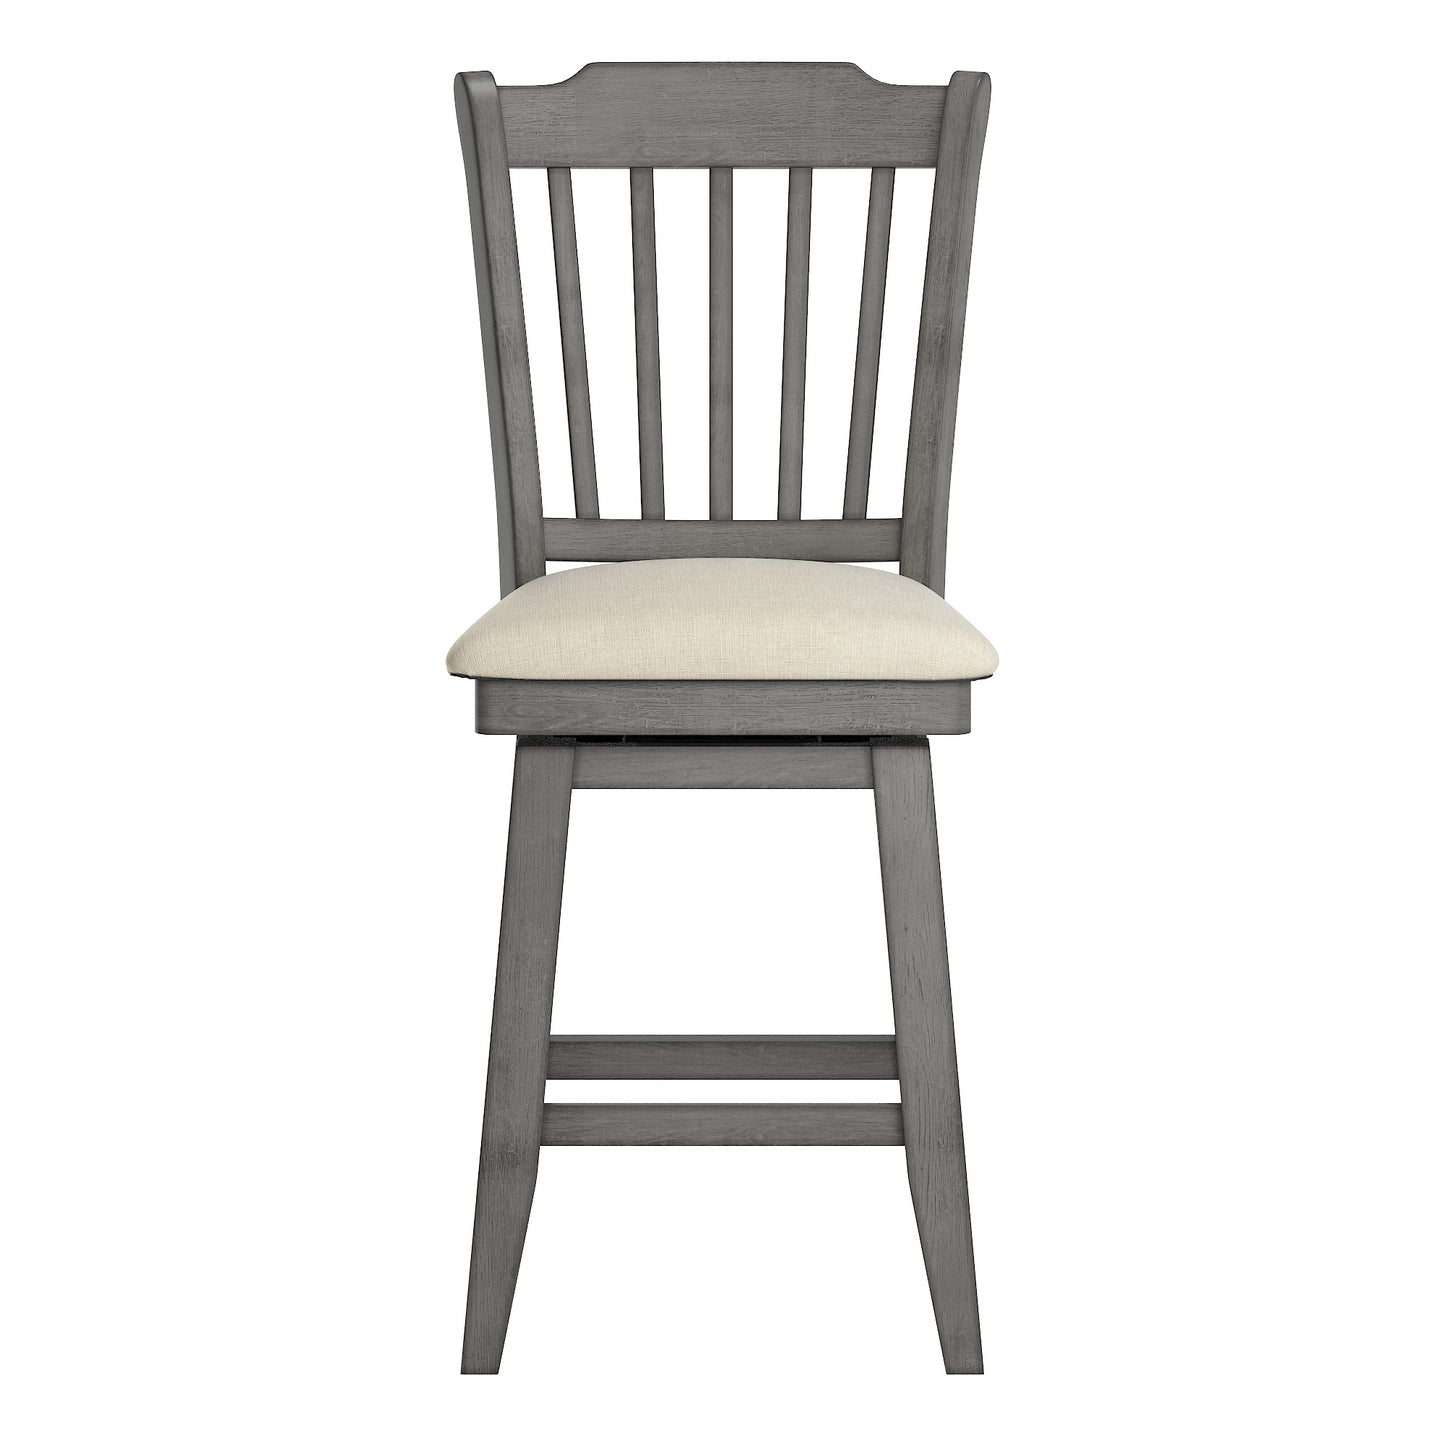 Slat Back Counter Height Wood Swivel Chair - Antique Grey Finish